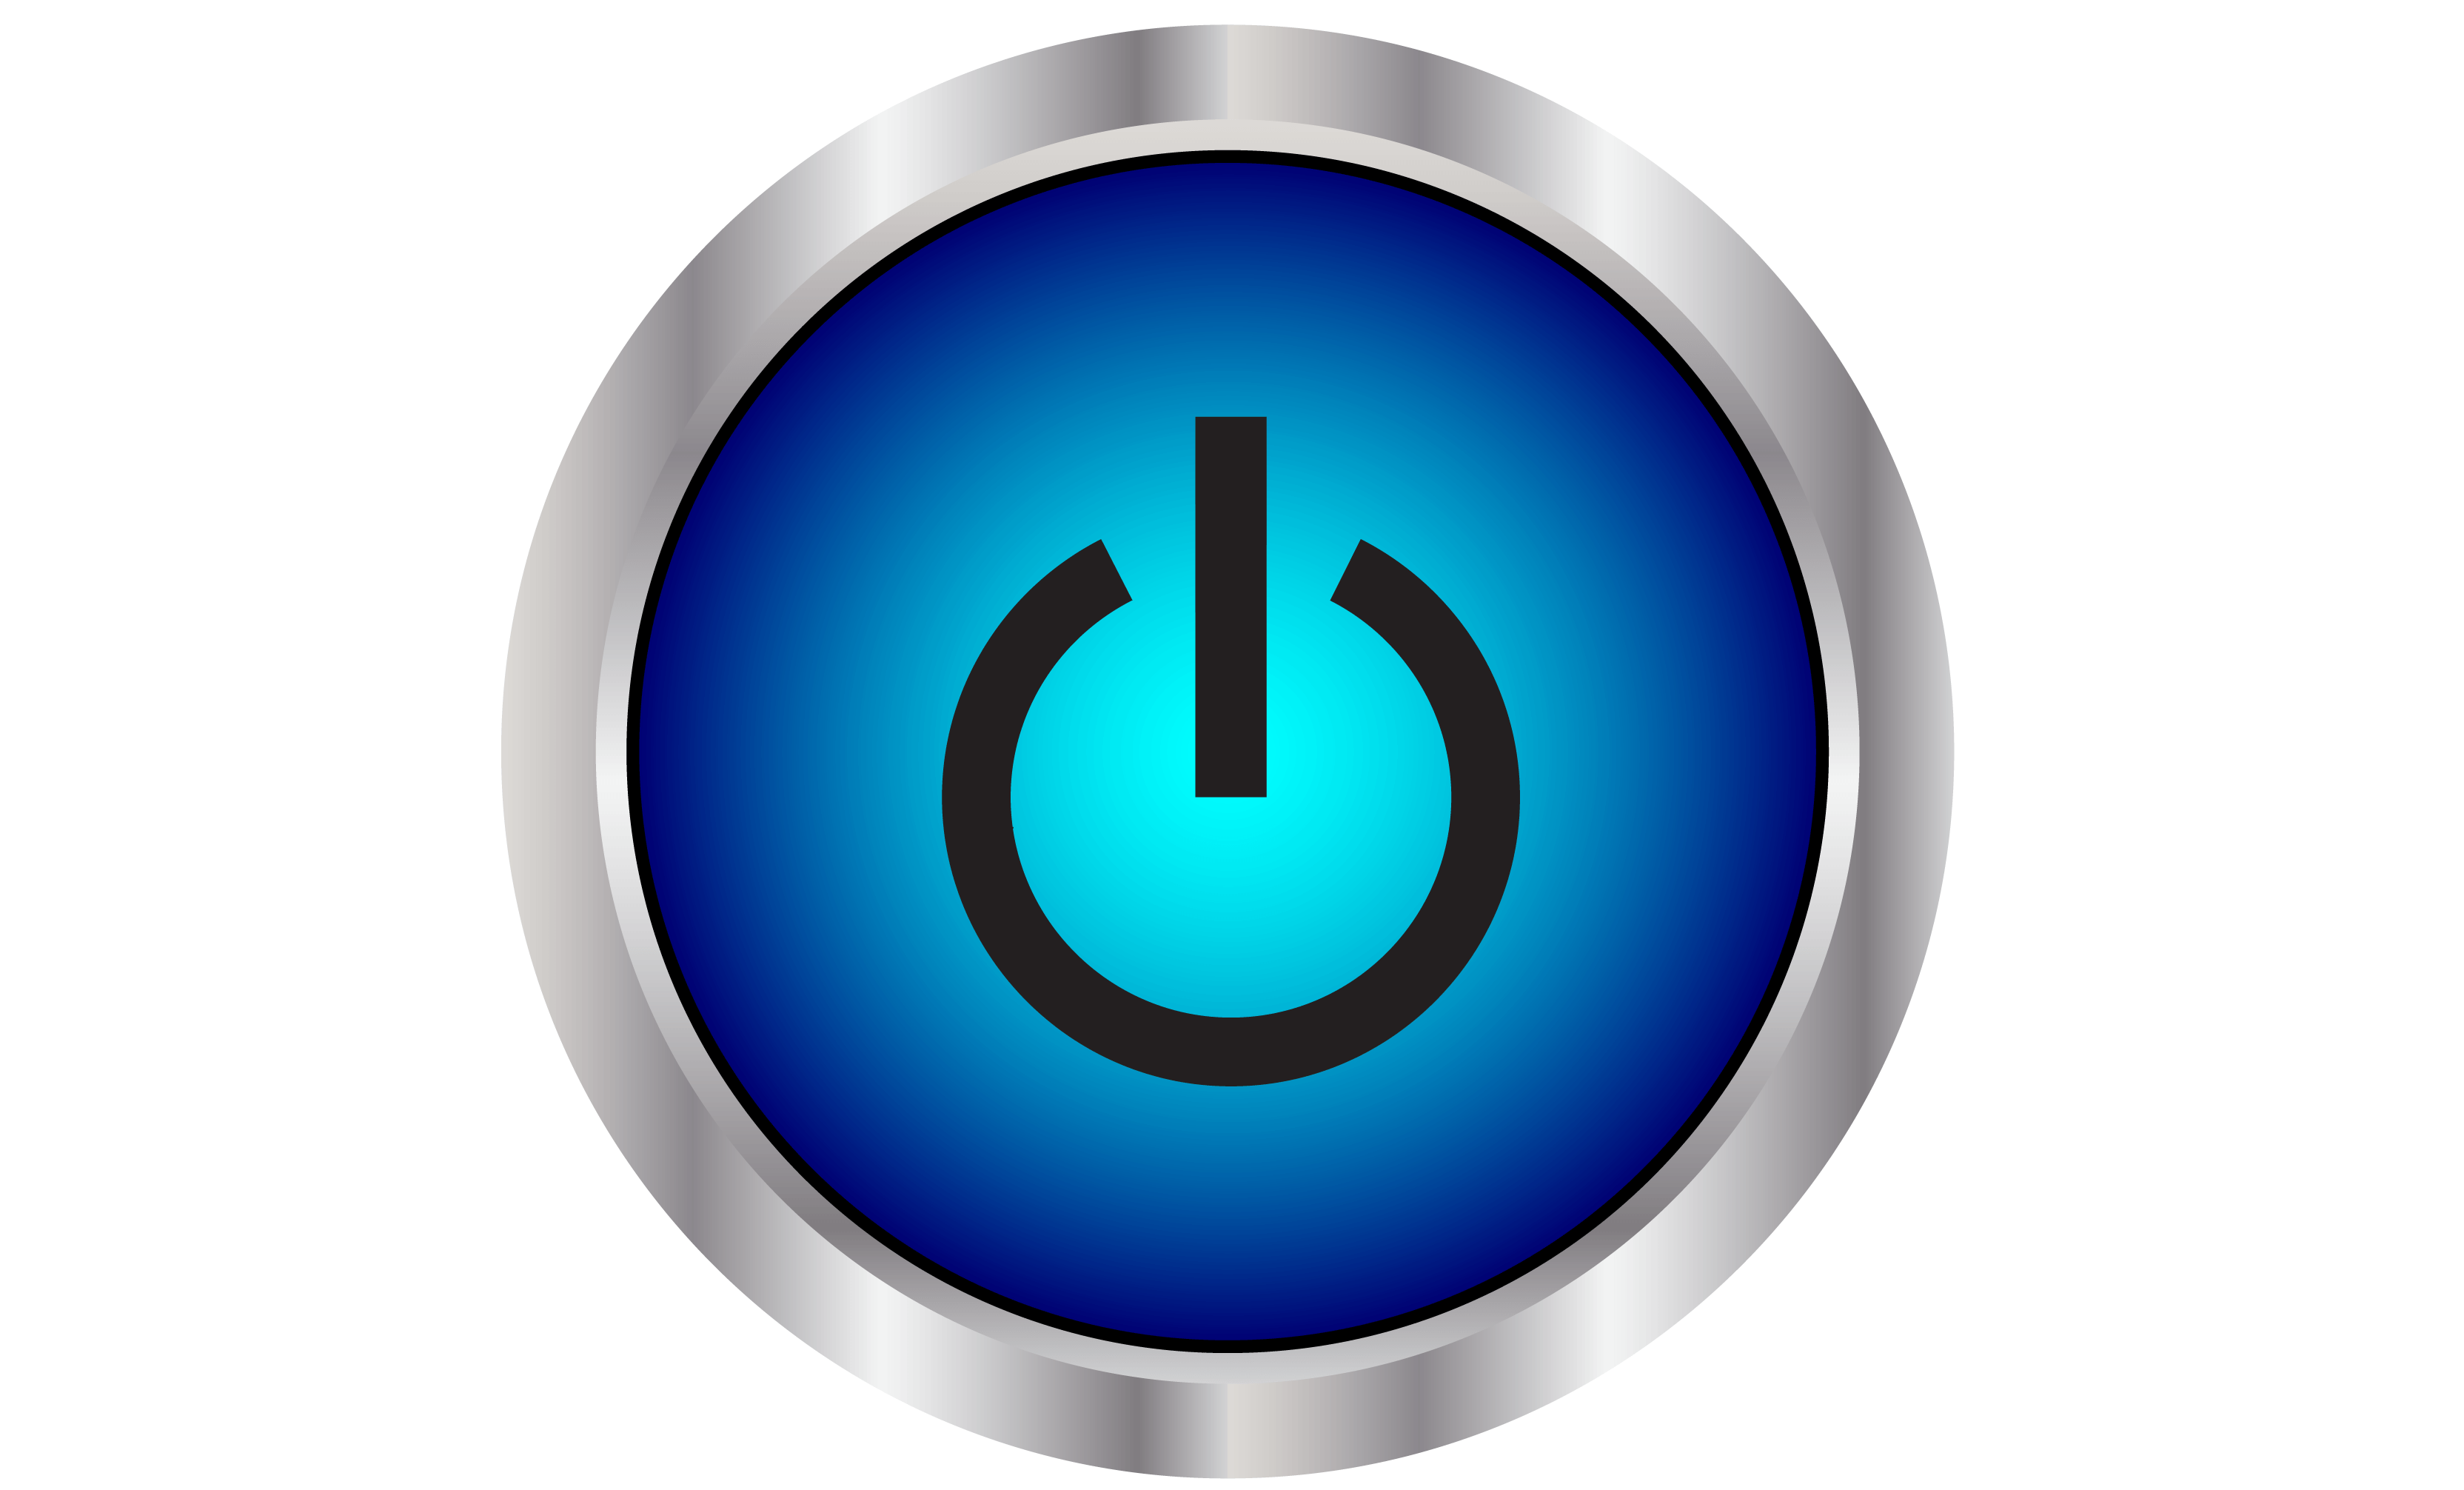 Power Button Wallpaper Image Photo Picture Background